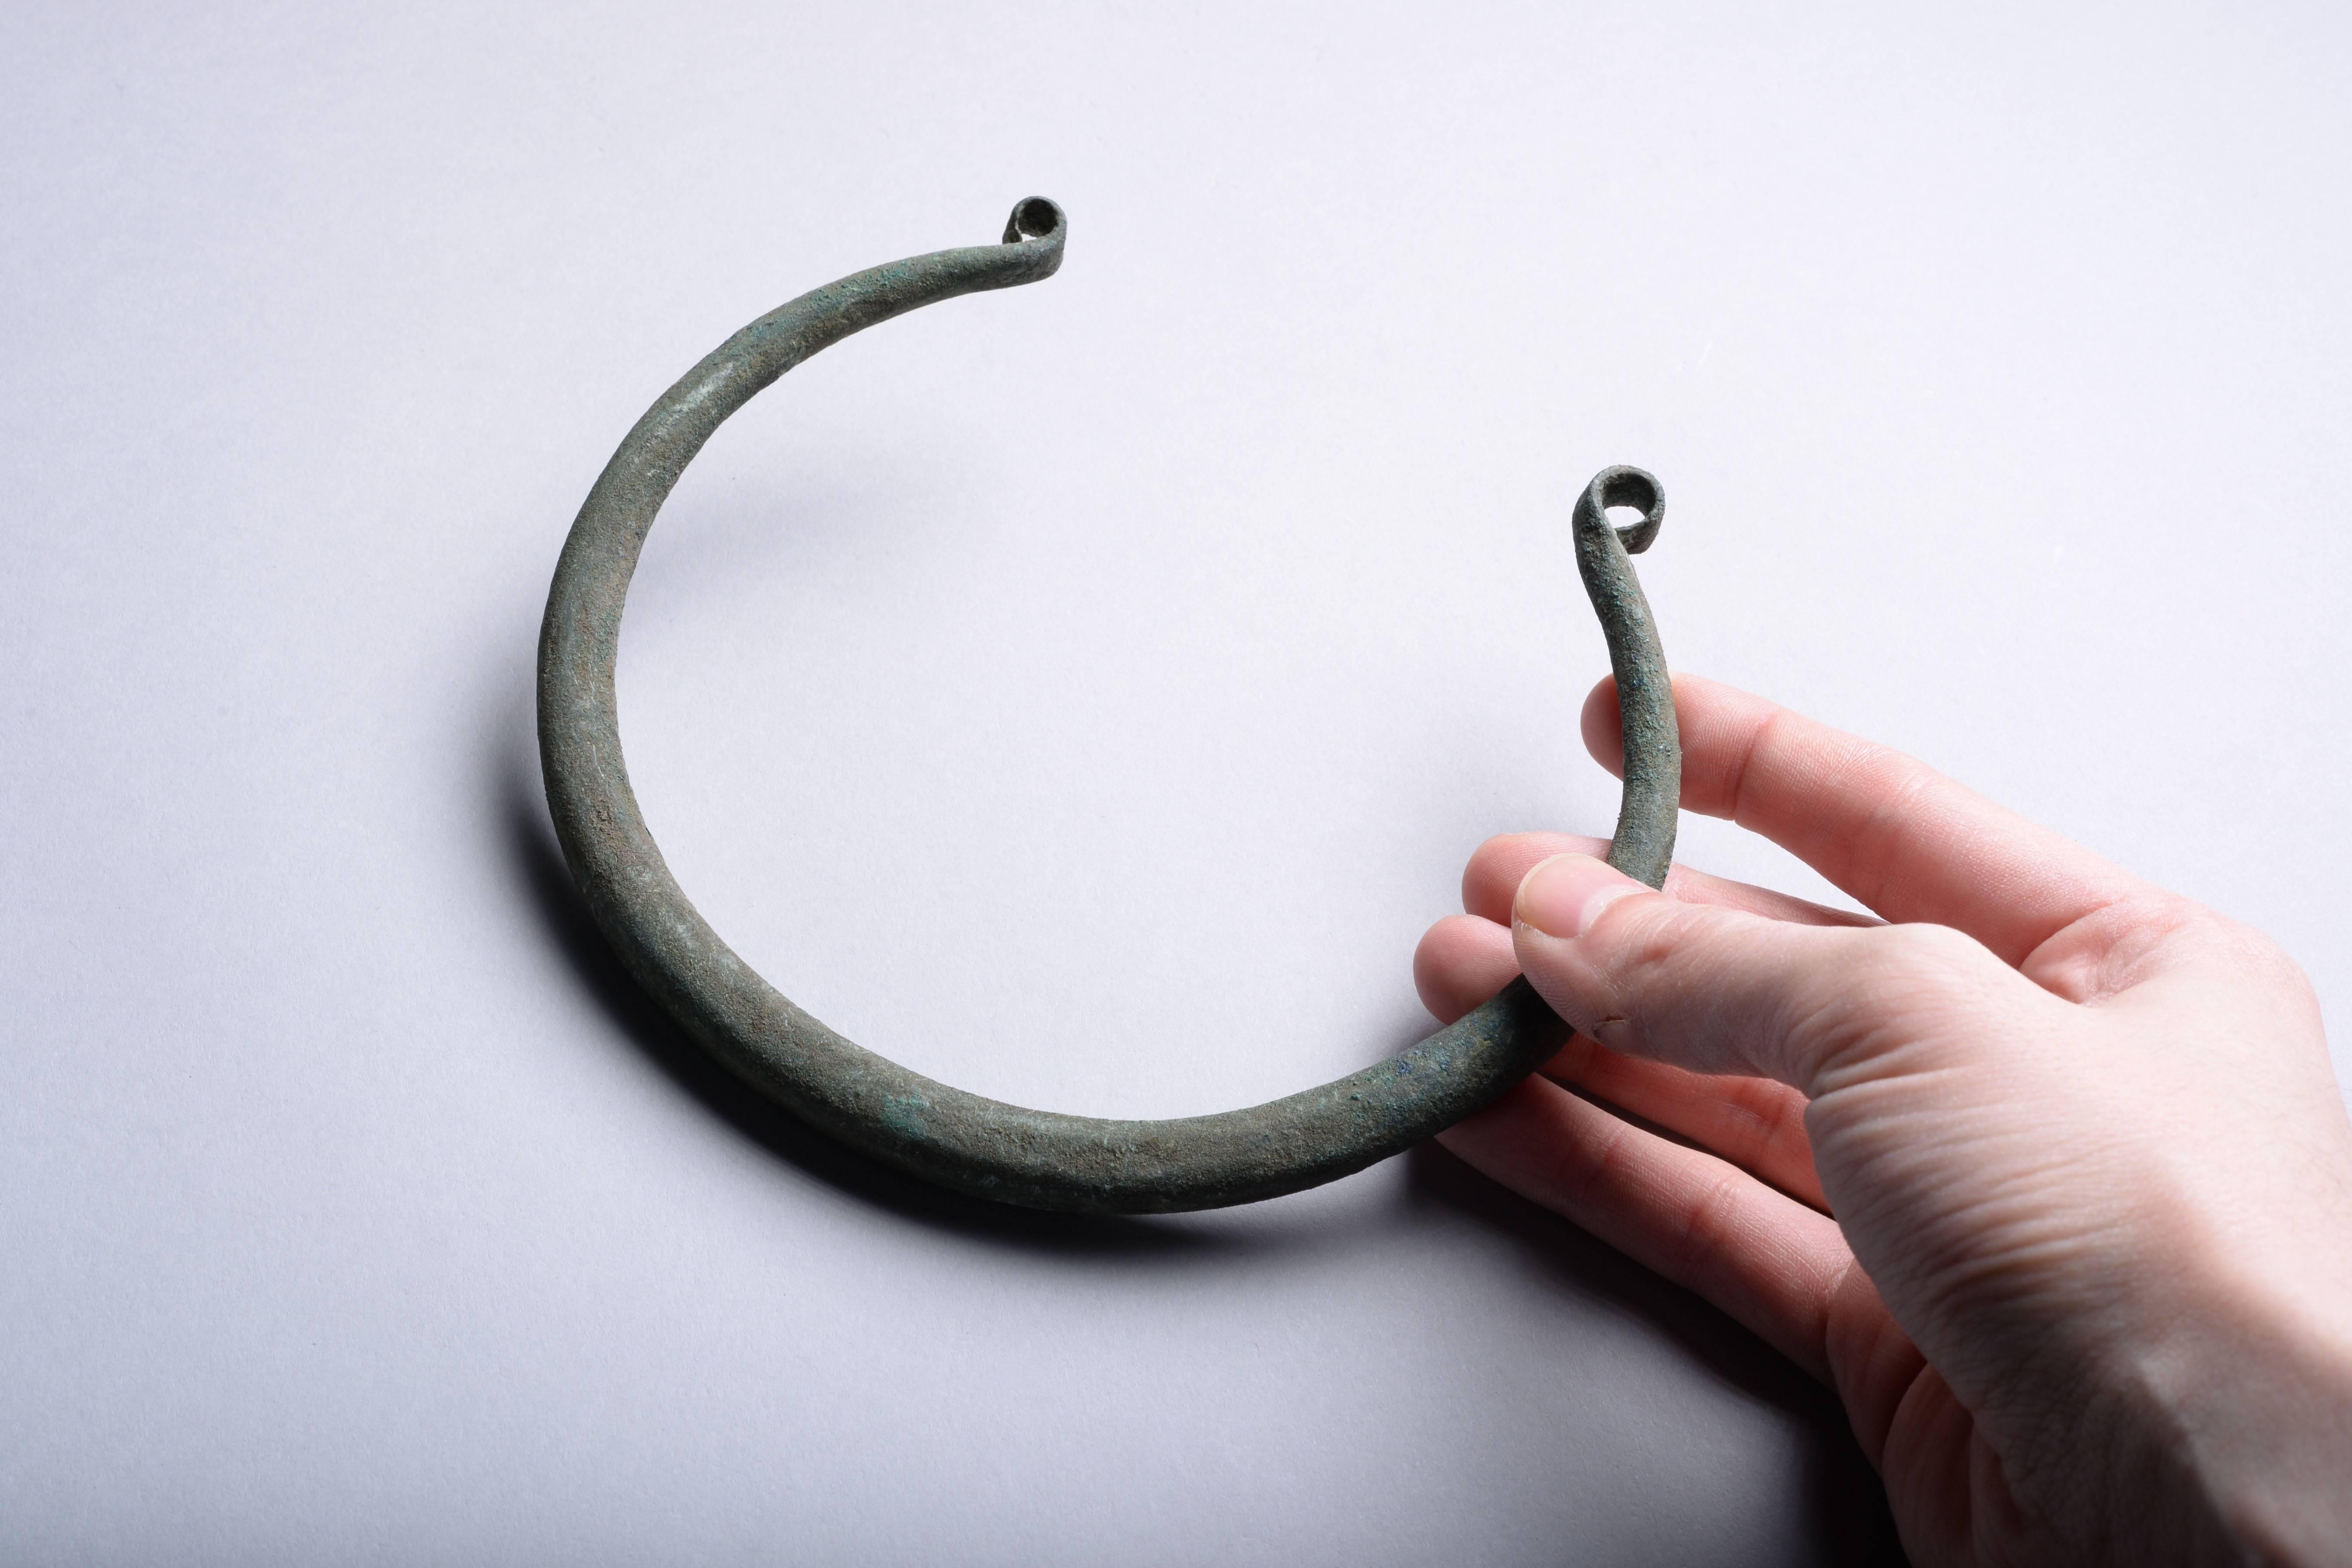 An elegant European copper alloy torc, dating to the 9th century BC.

Of typical penannular form, the terminals hammered flat and bent into curls, giving the piece a wonderful aesthetic.

Torcs were status objects worn around the neck by the